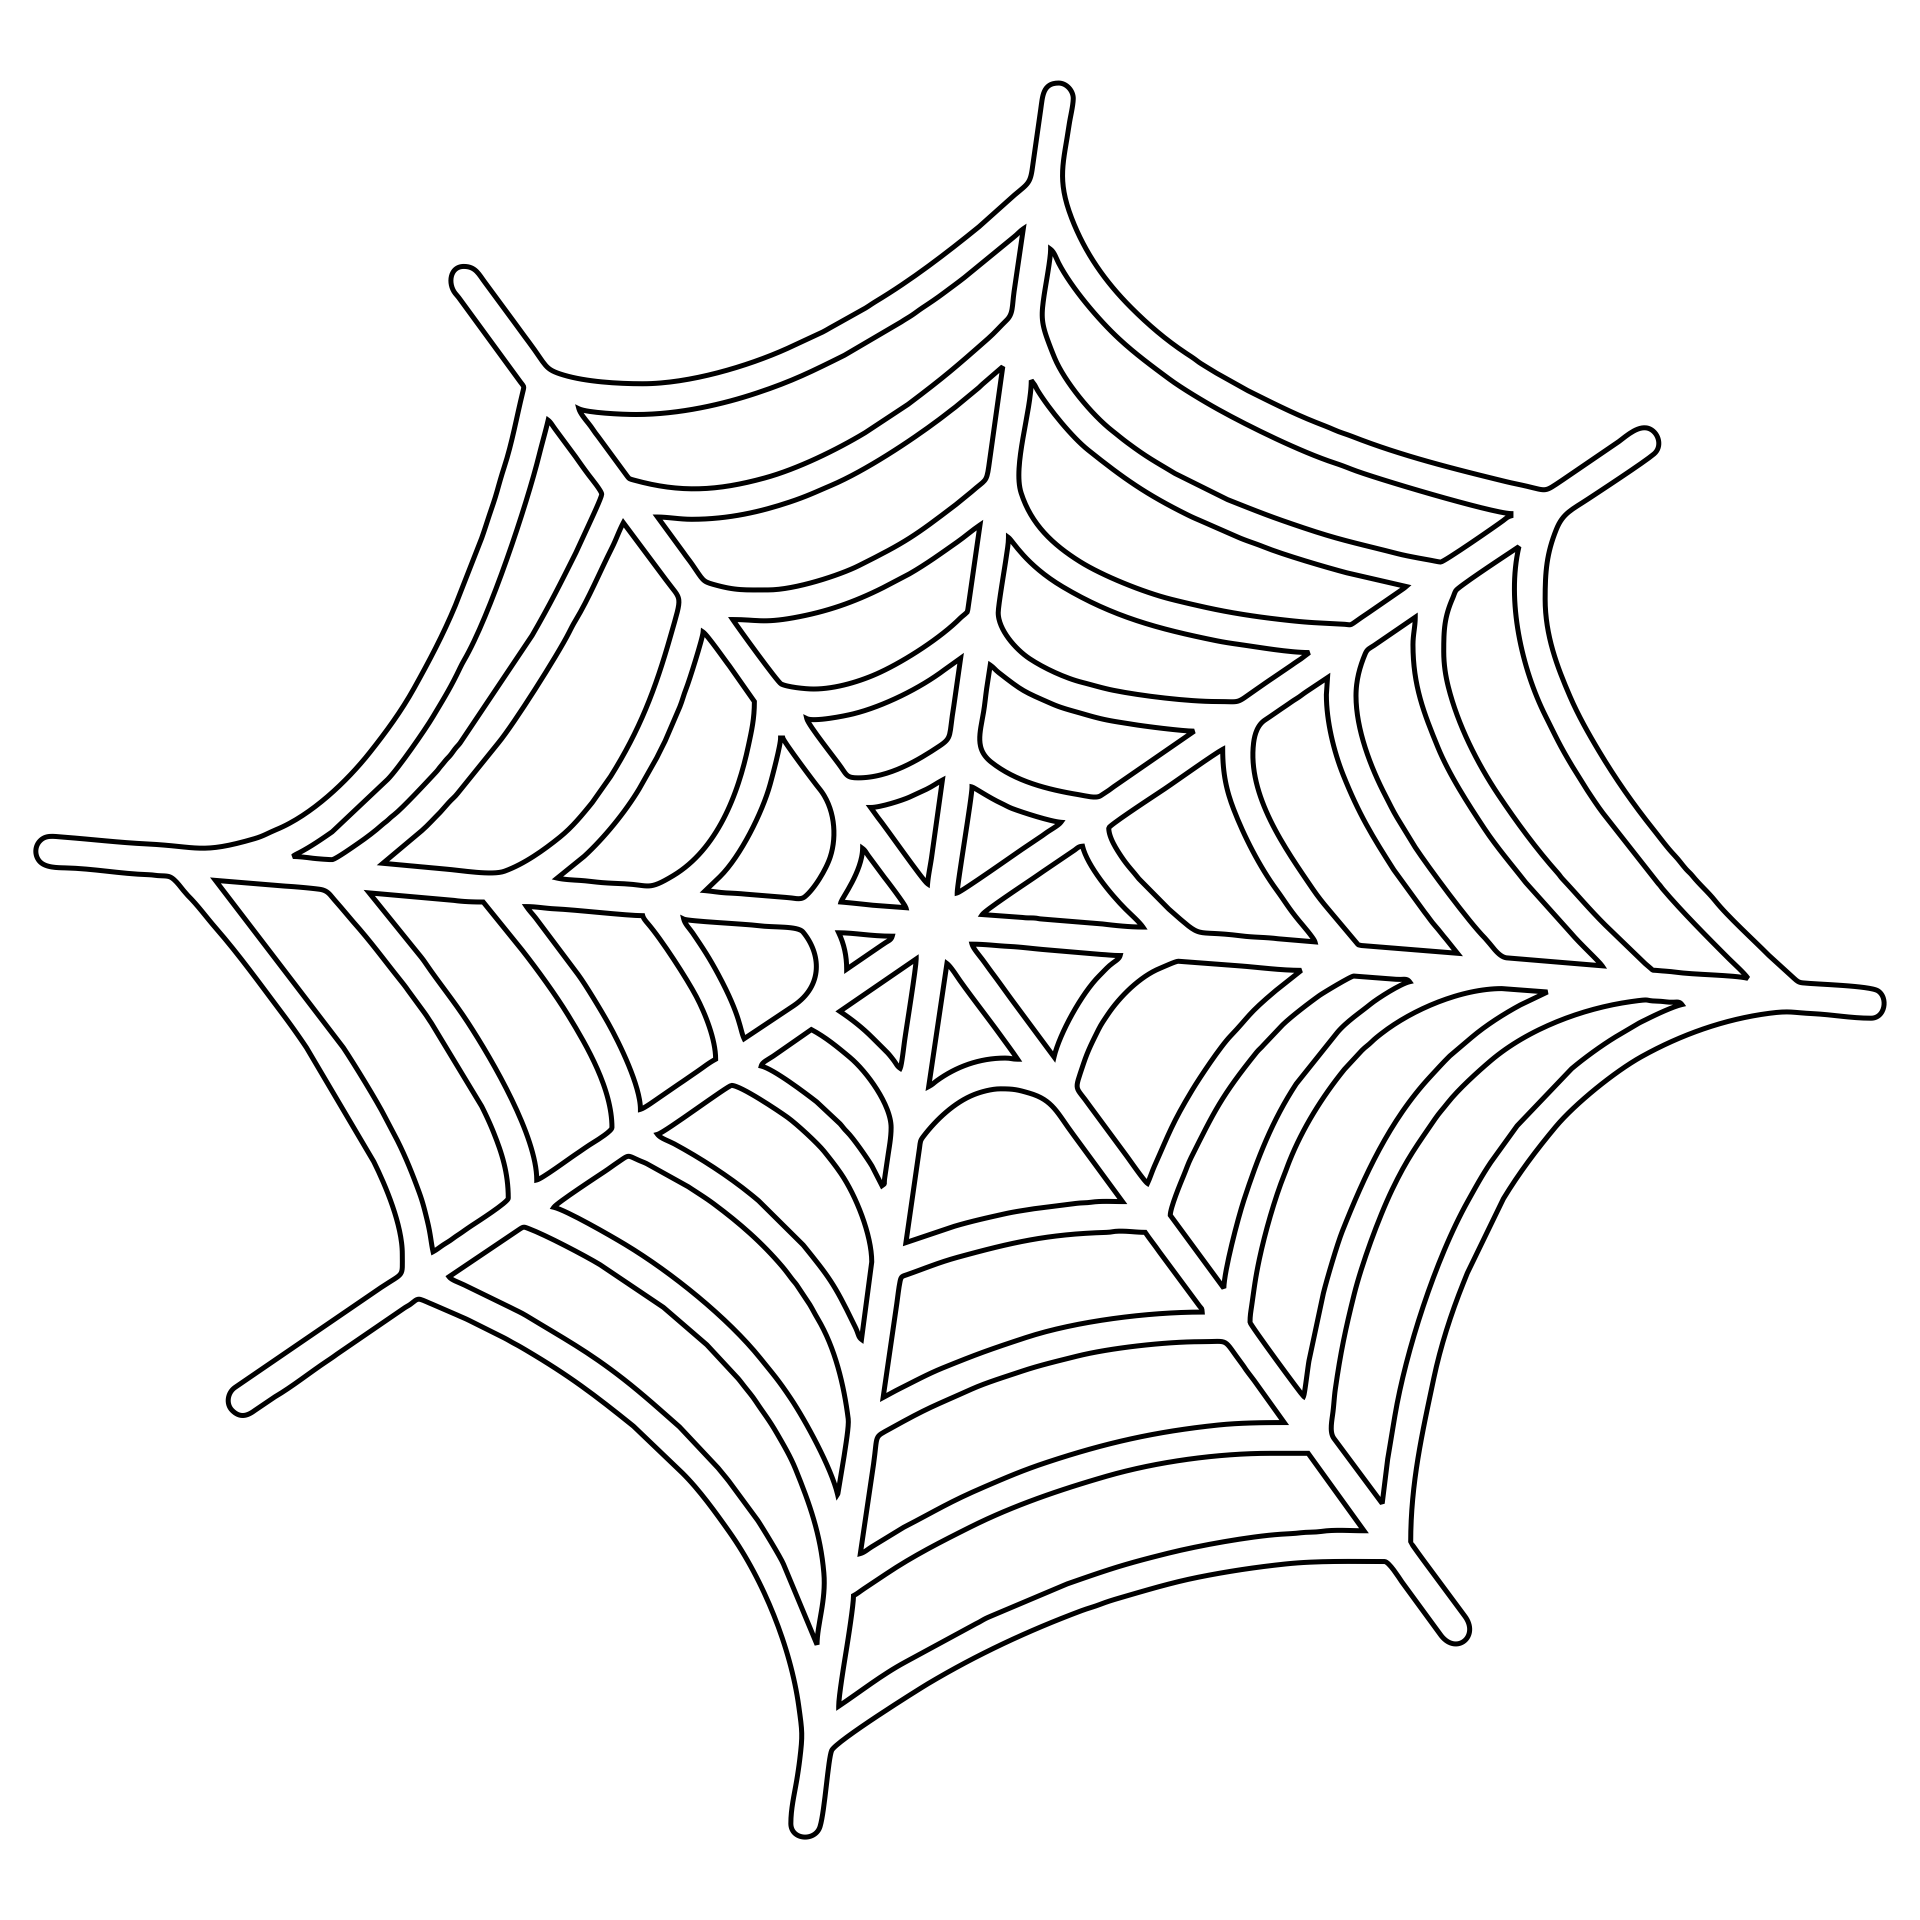 15 Best Printable Halloween Templates Spider PDF For Free At Printablee